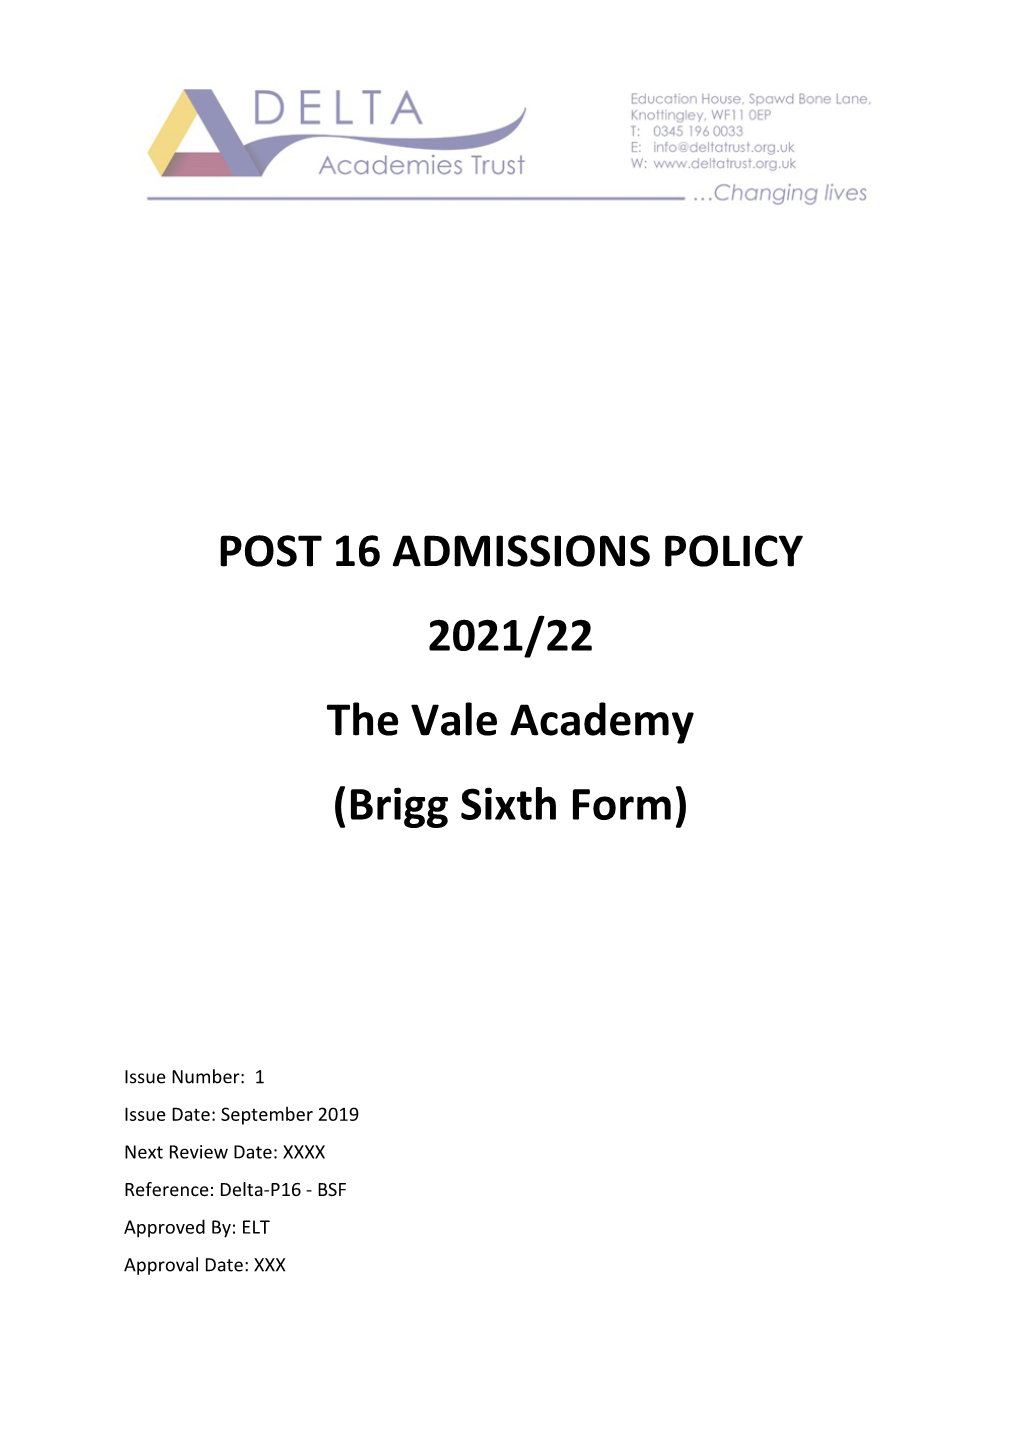 The Vale Academy Sixth Form Admissions Policy 2021-22